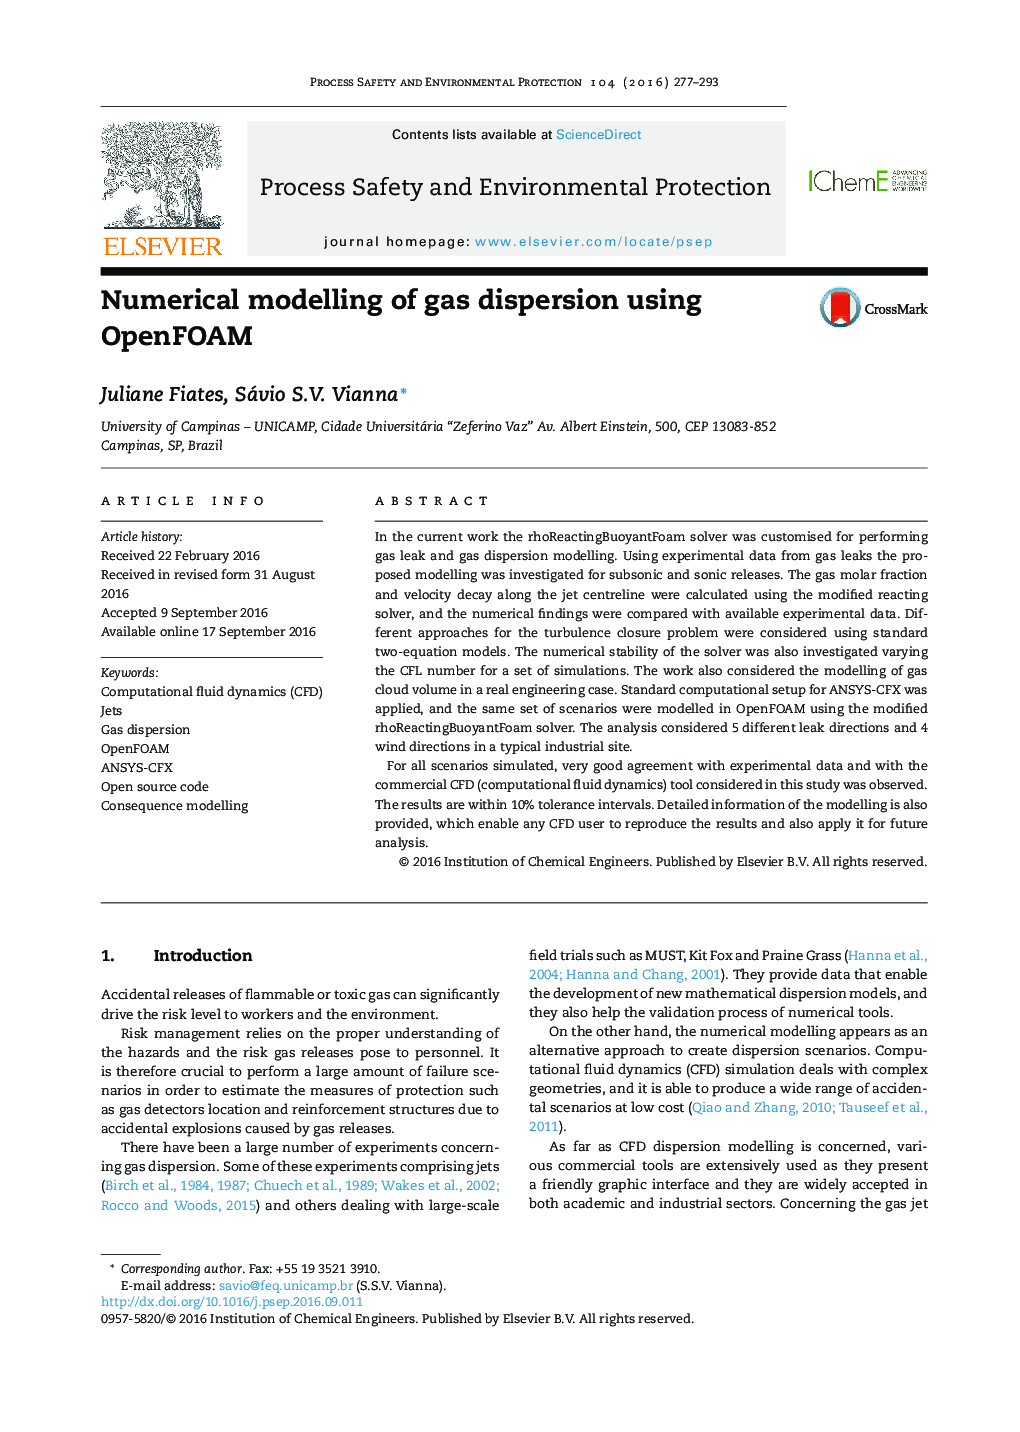 Numerical modelling of gas dispersion using OpenFOAM